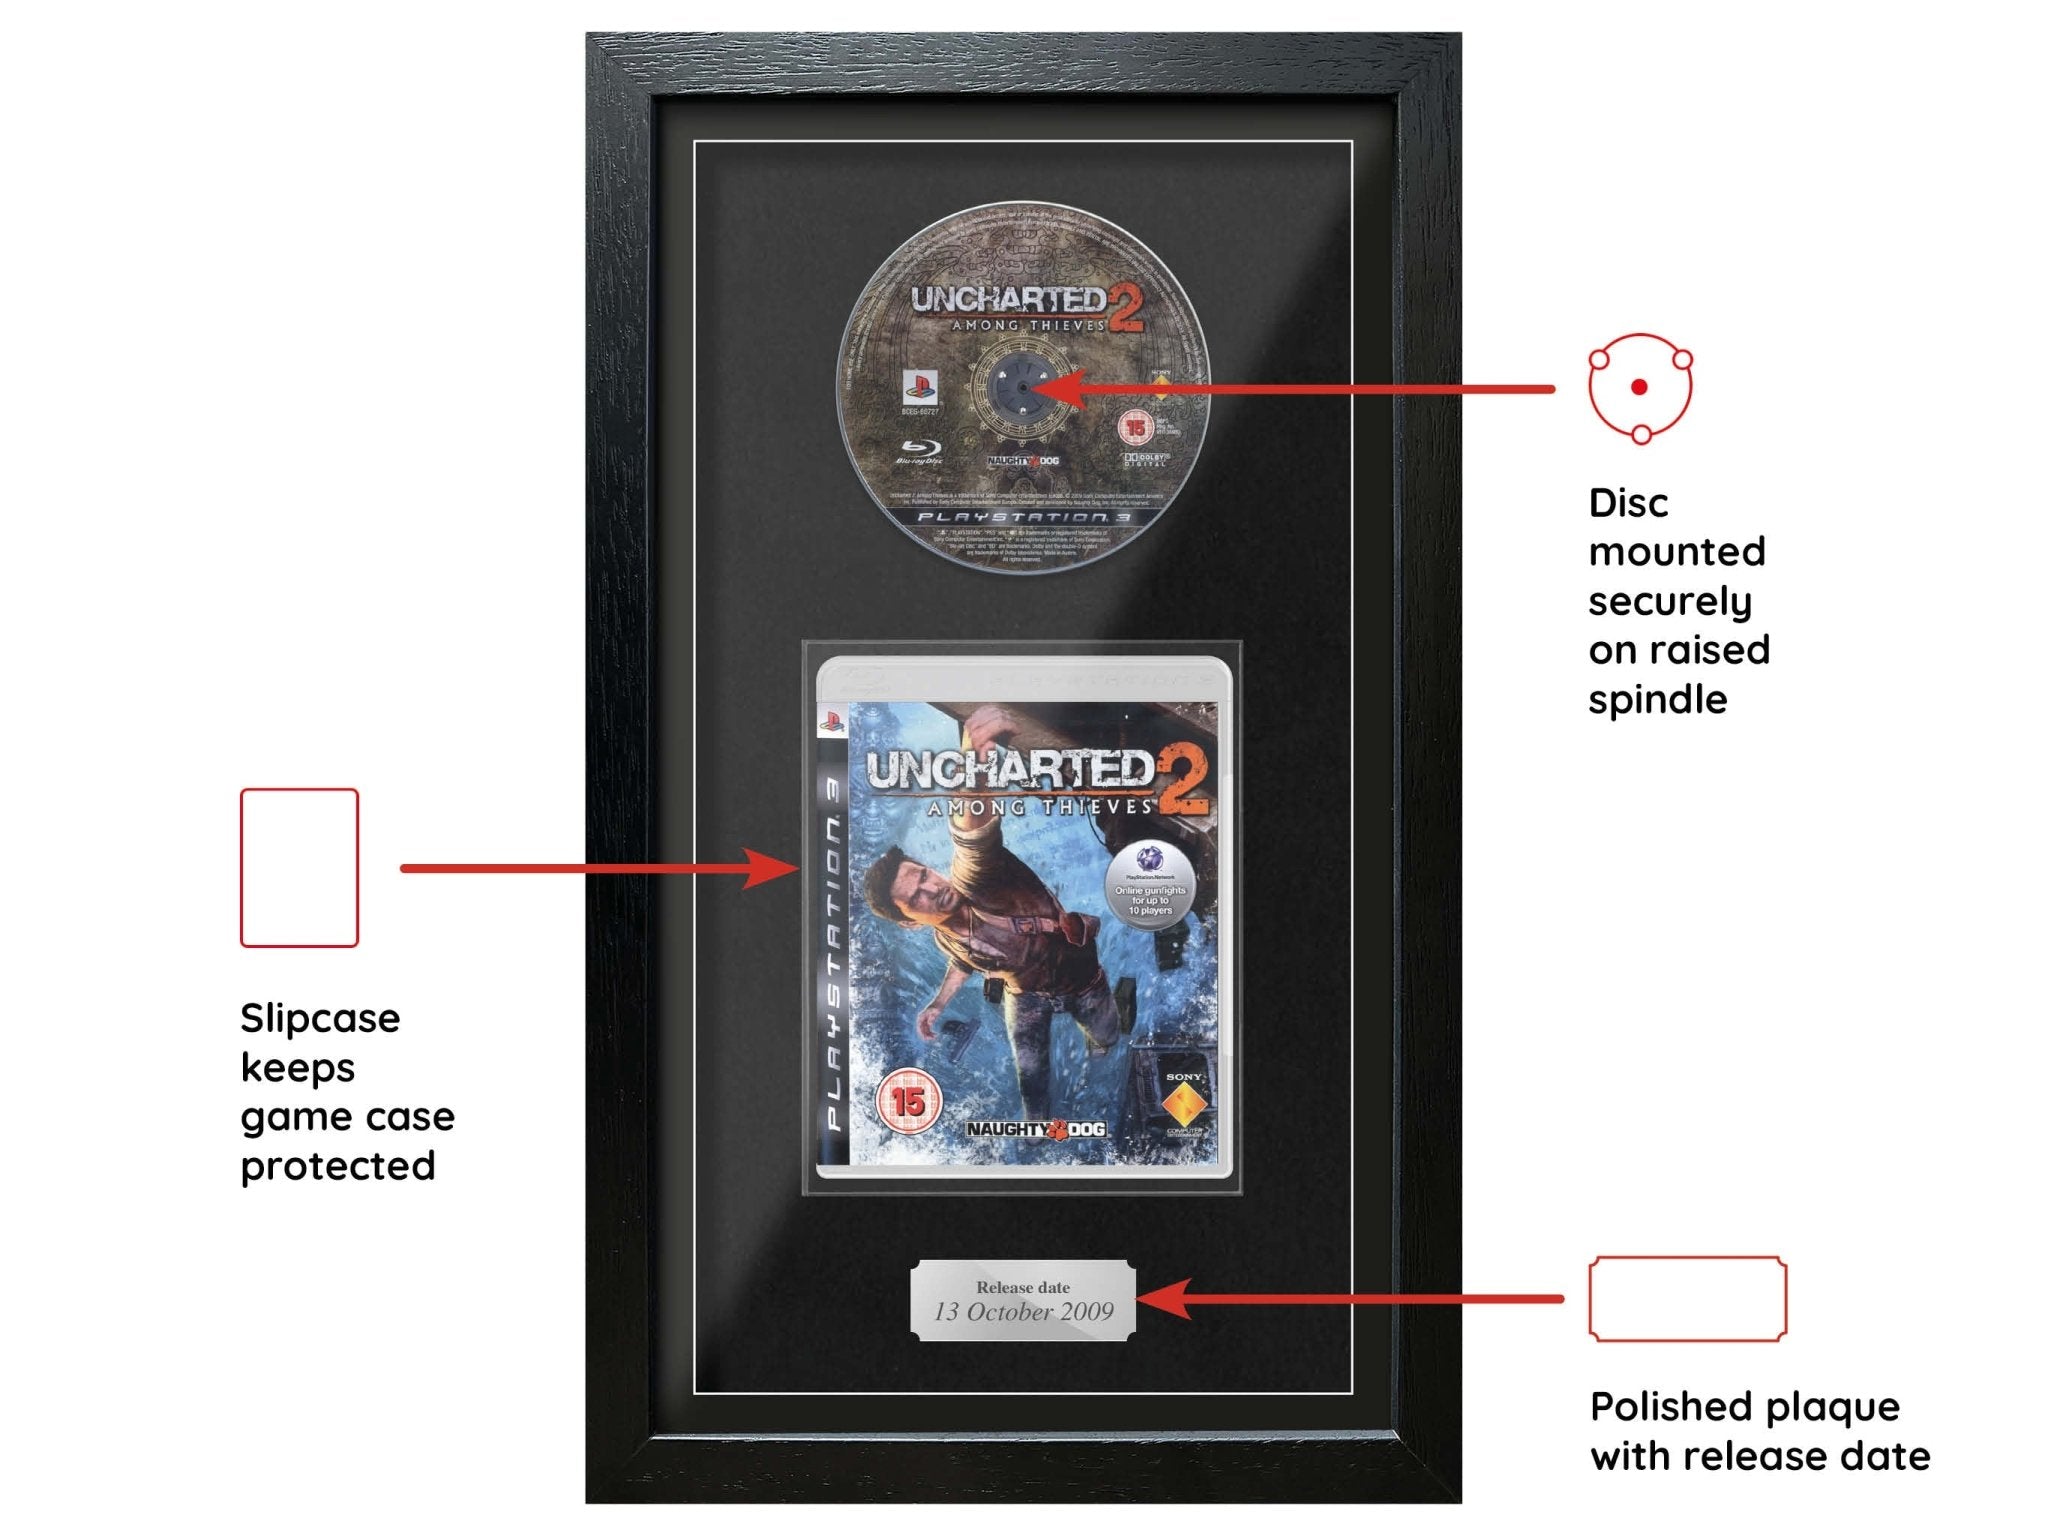 Uncharted 2: Among Thieves (Exhibition Range) Framed Game - Frame-A-Game